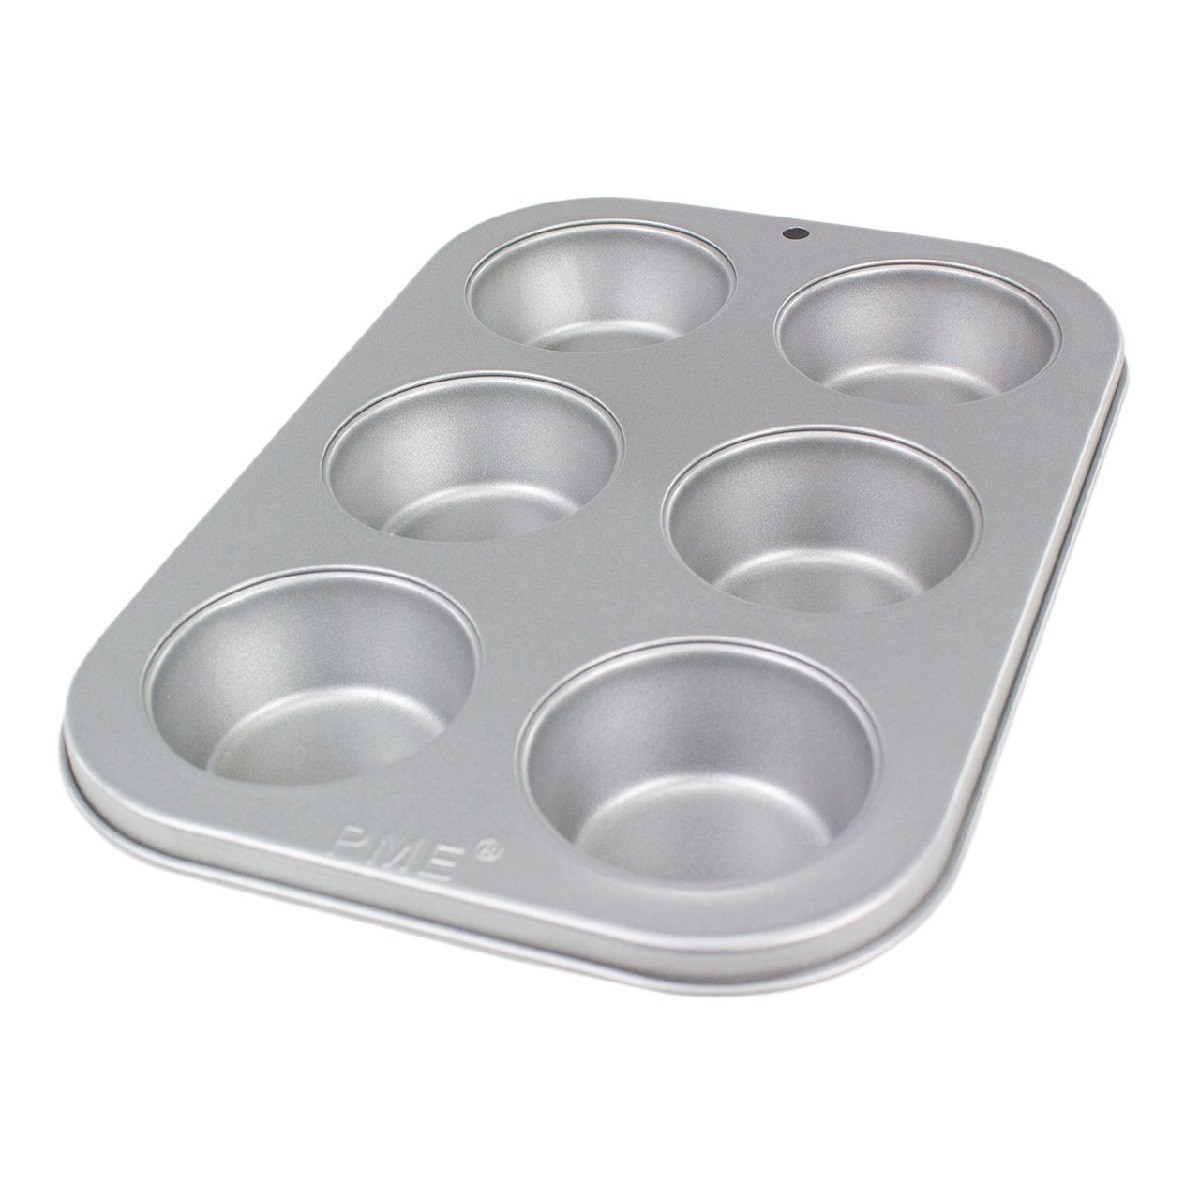 Muffin / Cupcake Baking Mould PME Standard 6 pieces